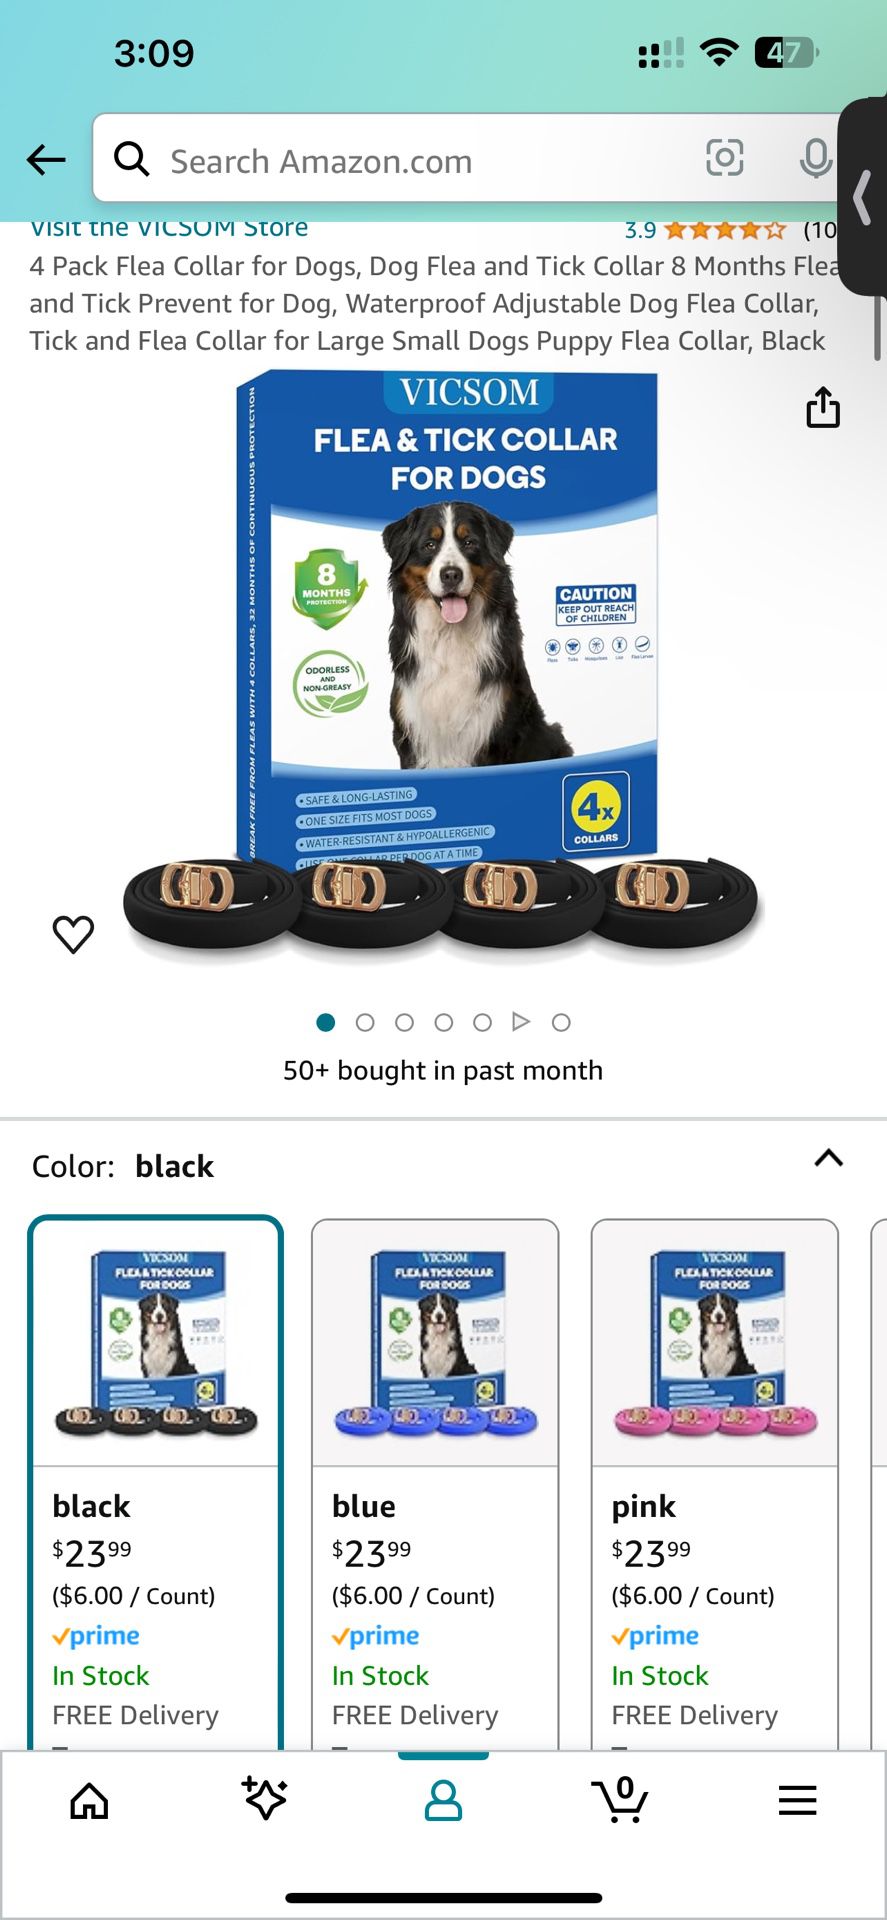 4 Pack Flea Collar for Dogs, Dog Flea and Tick Collar 8 Months Flea and Tick Prevent for Dog, Waterproof Adjustable Dog Flea Collar, Tick and Flea Col